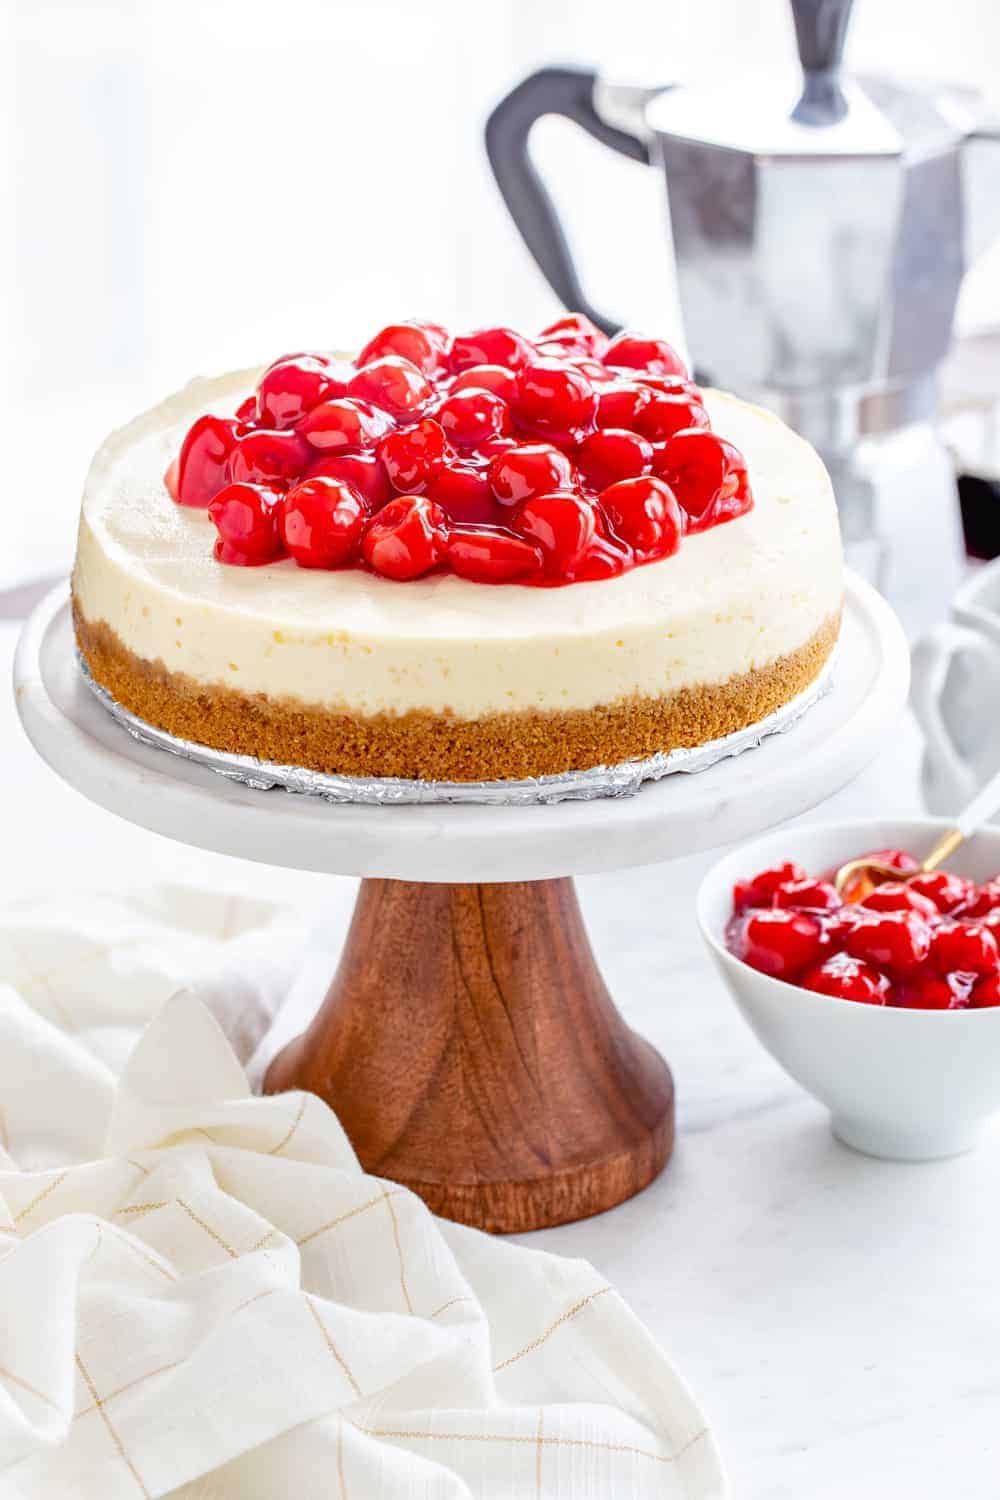 Instant Pot Cheesecake couldn't be easier or more delicious. Serve it up with pie filling, fresh fruit, or chocolate ganache for the perfect dessert. 